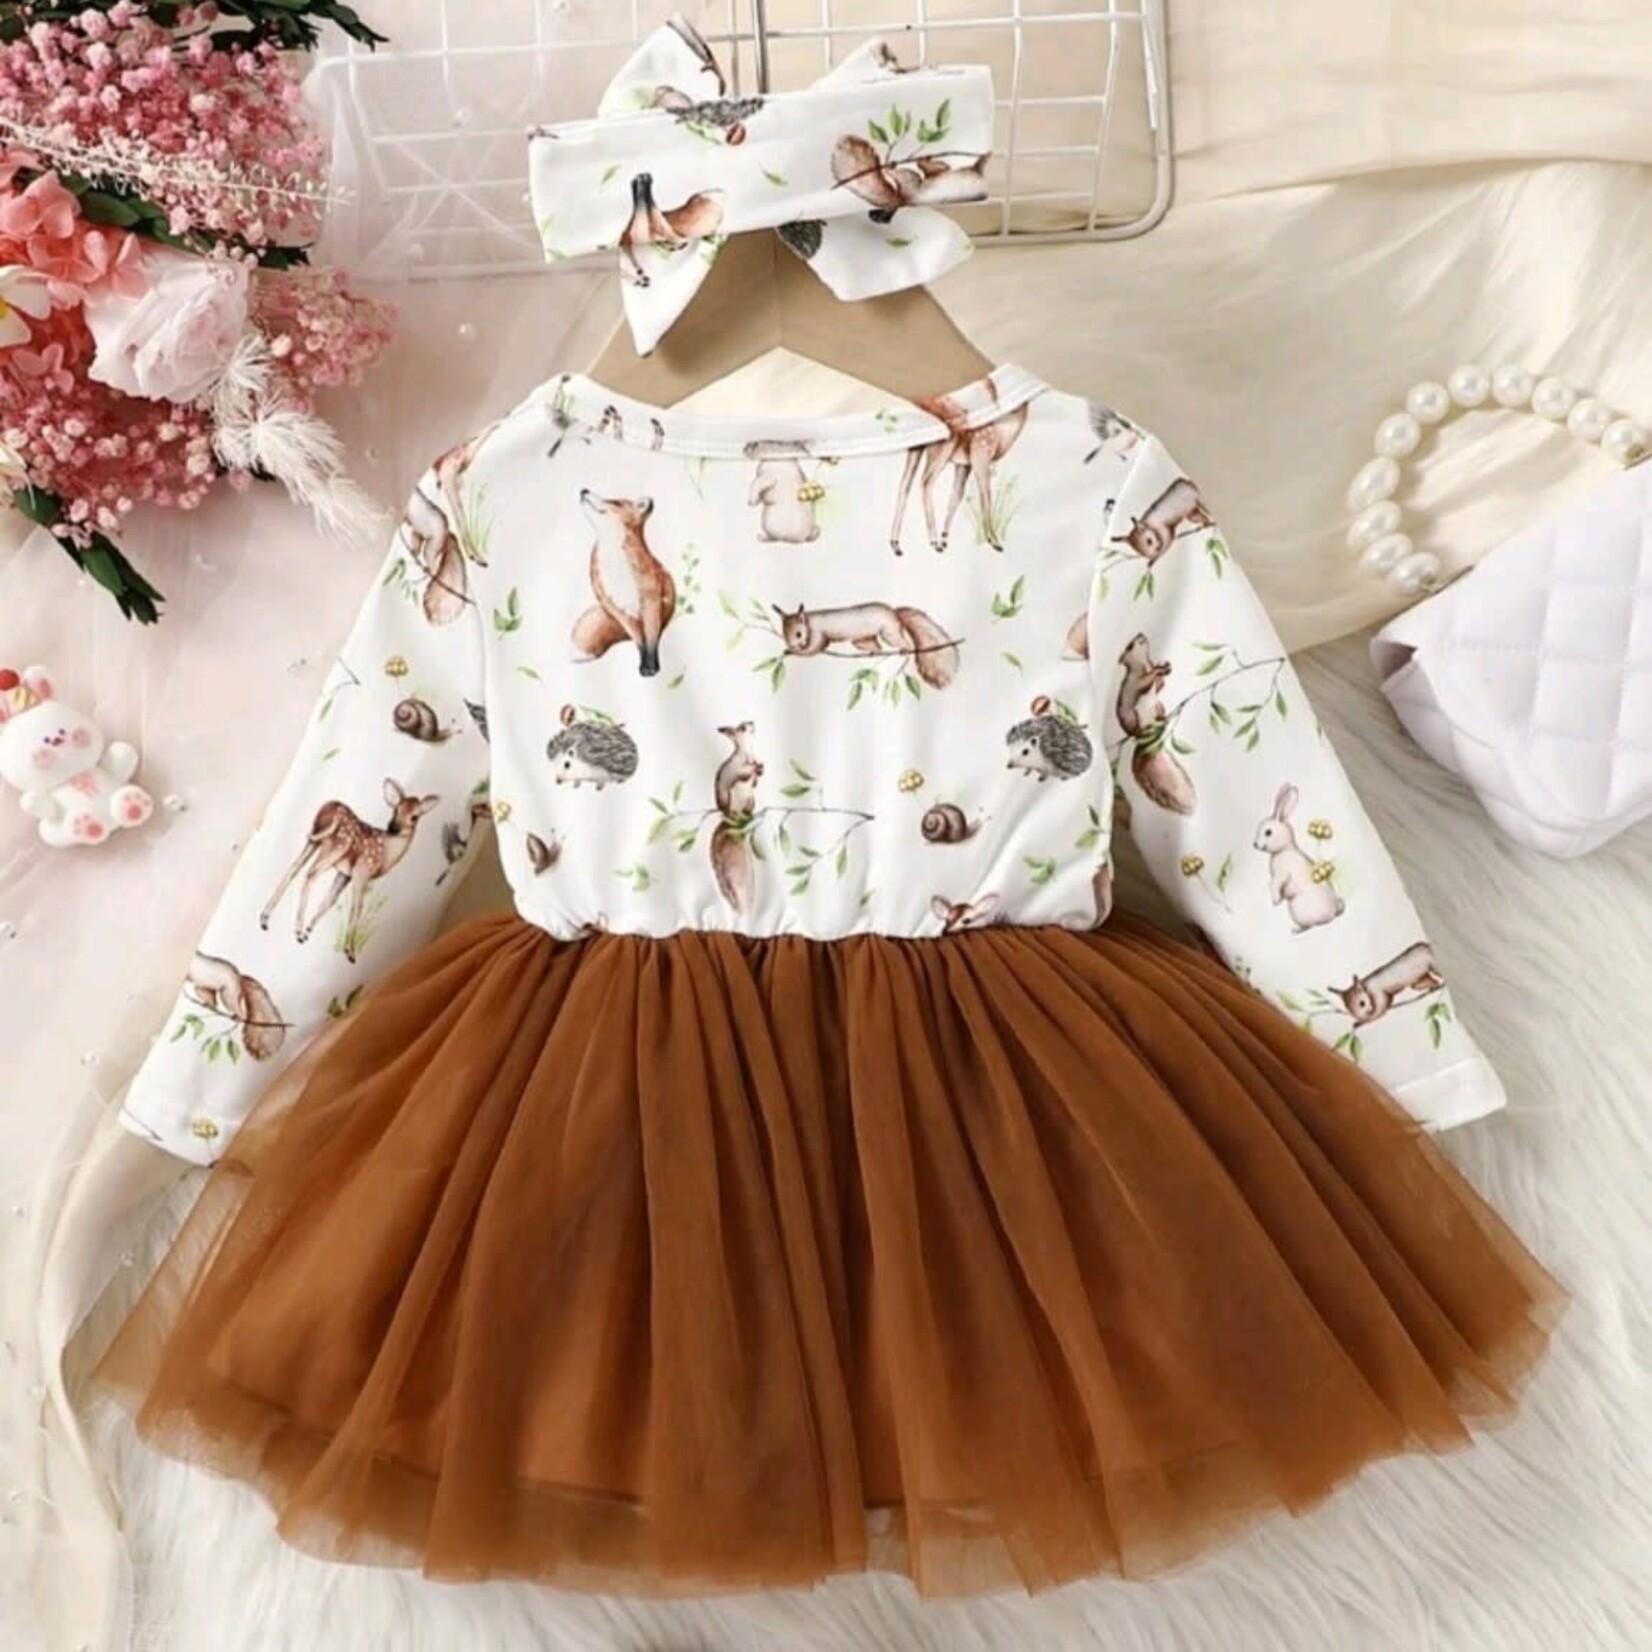 Baby Woodland Print Tulle Dress w/ Head Band